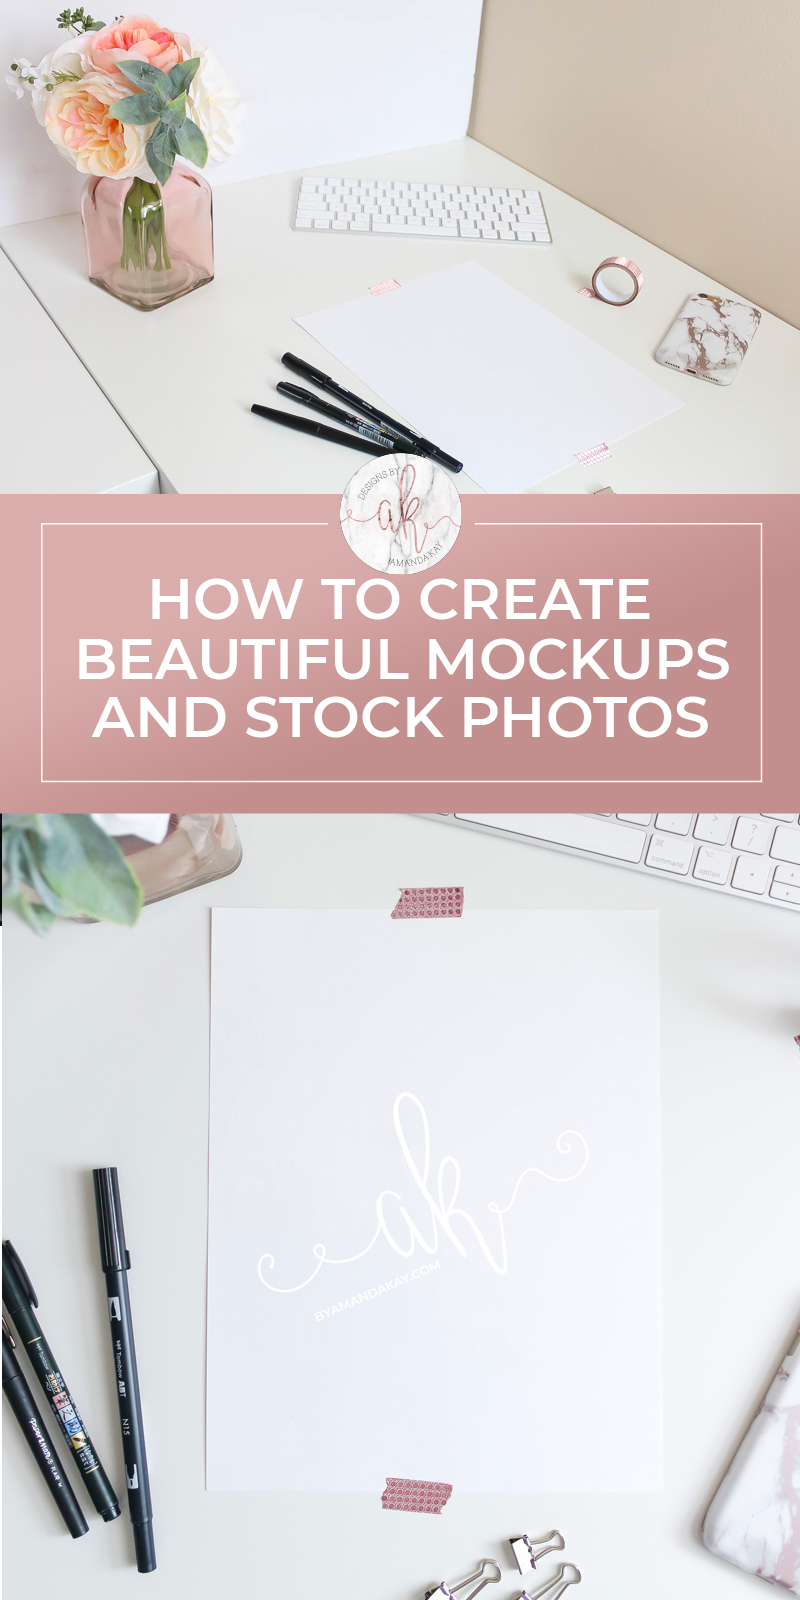 How to create mockups and stock photos